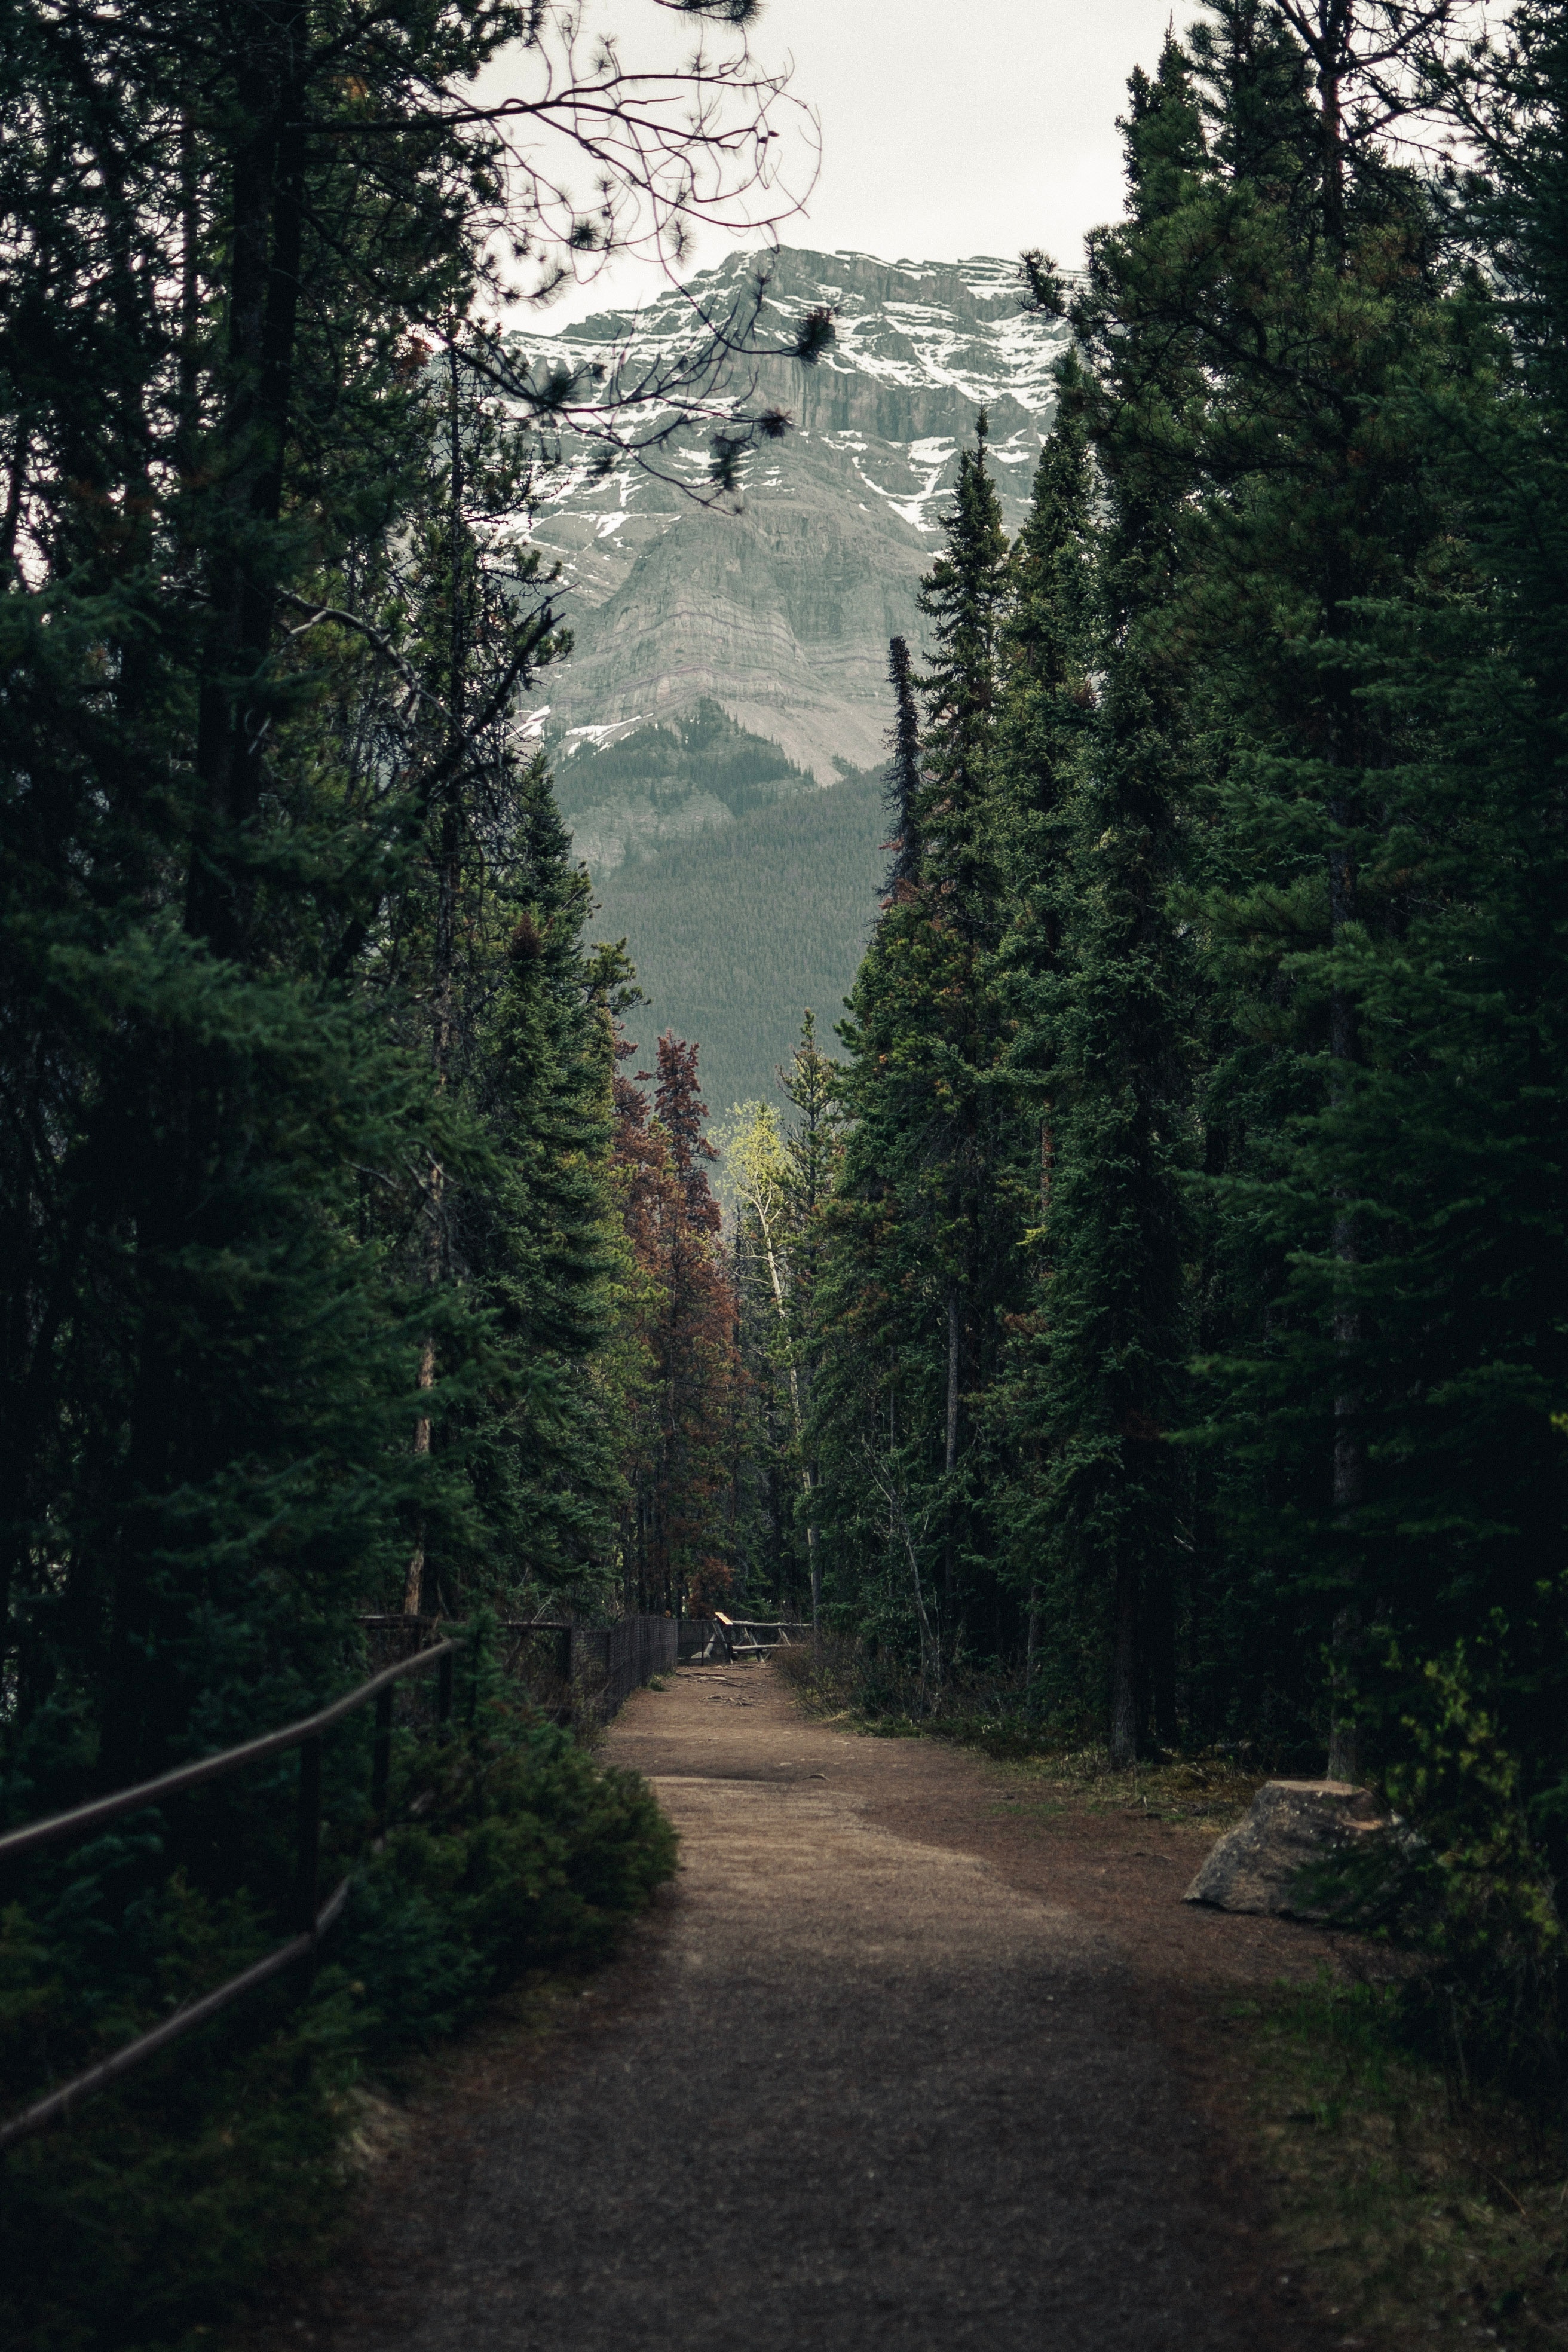 Popular Forest Image for Phone